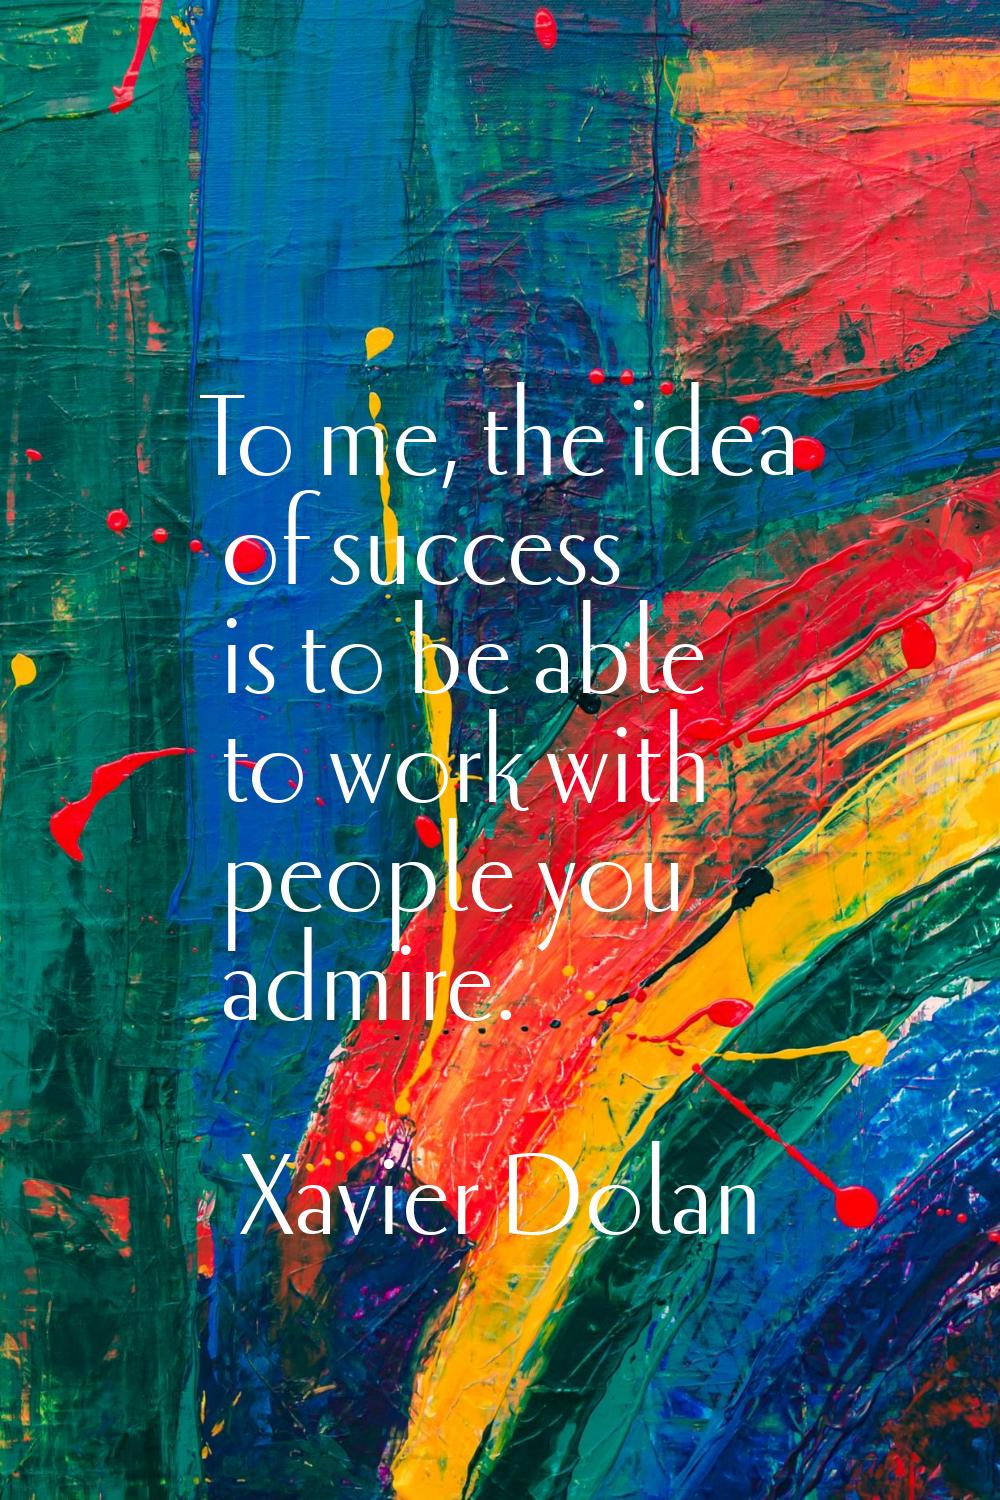 To me, the idea of success is to be able to work with people you admire.